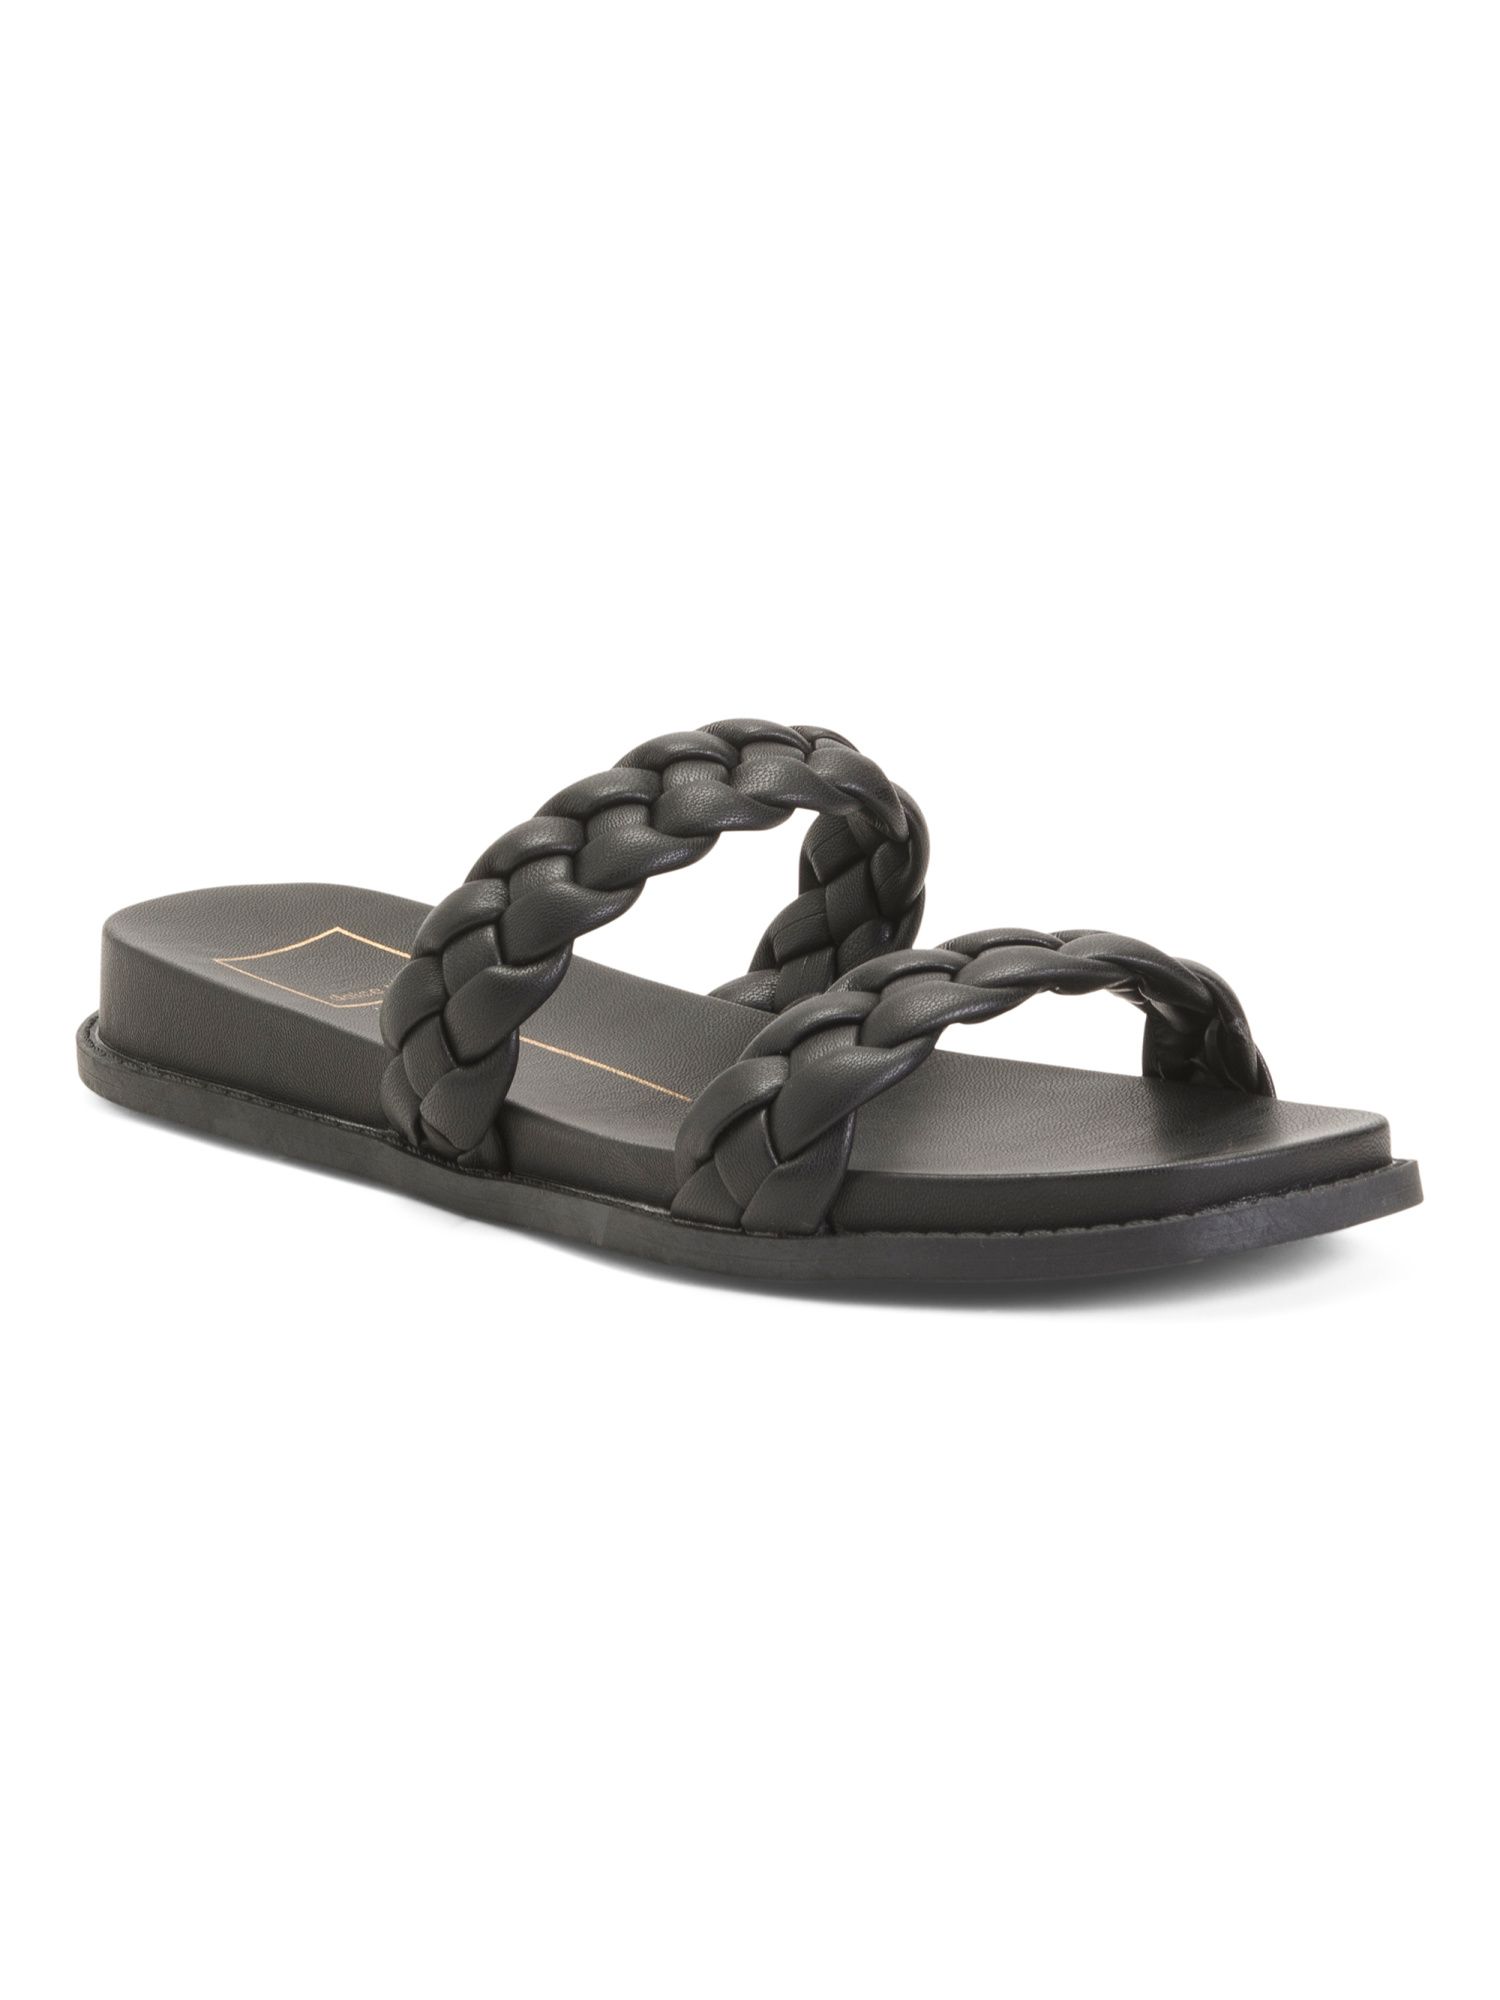 Woven Double Band Sandals | Women's Shoes | Marshalls | Marshalls